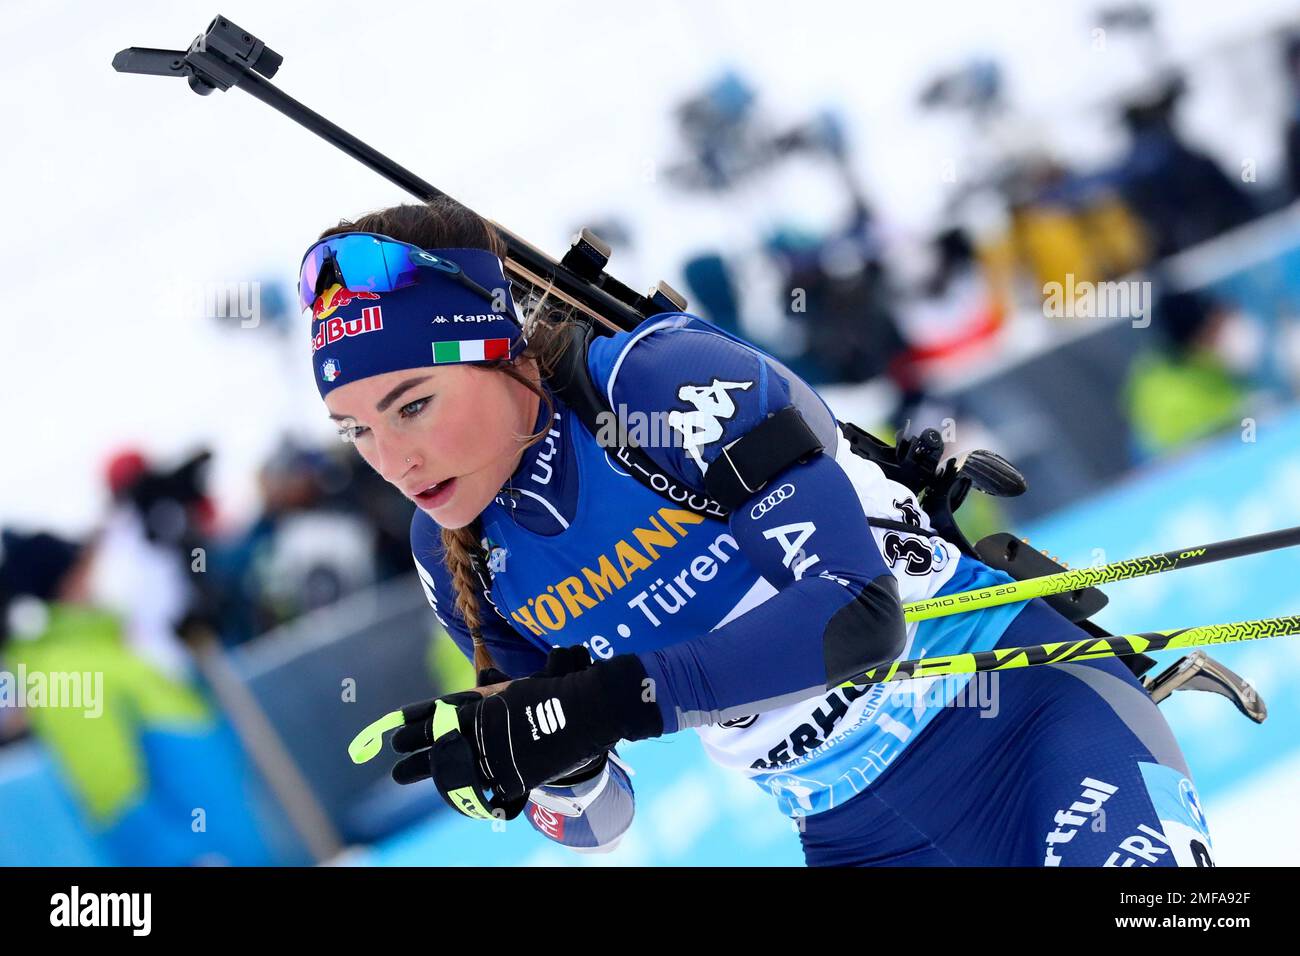 Dorothea Wierer of Italy competes during the womens 7.5km sprint race at the Biathlon World Cup in Oberhof, Germany, Thursday, Jan